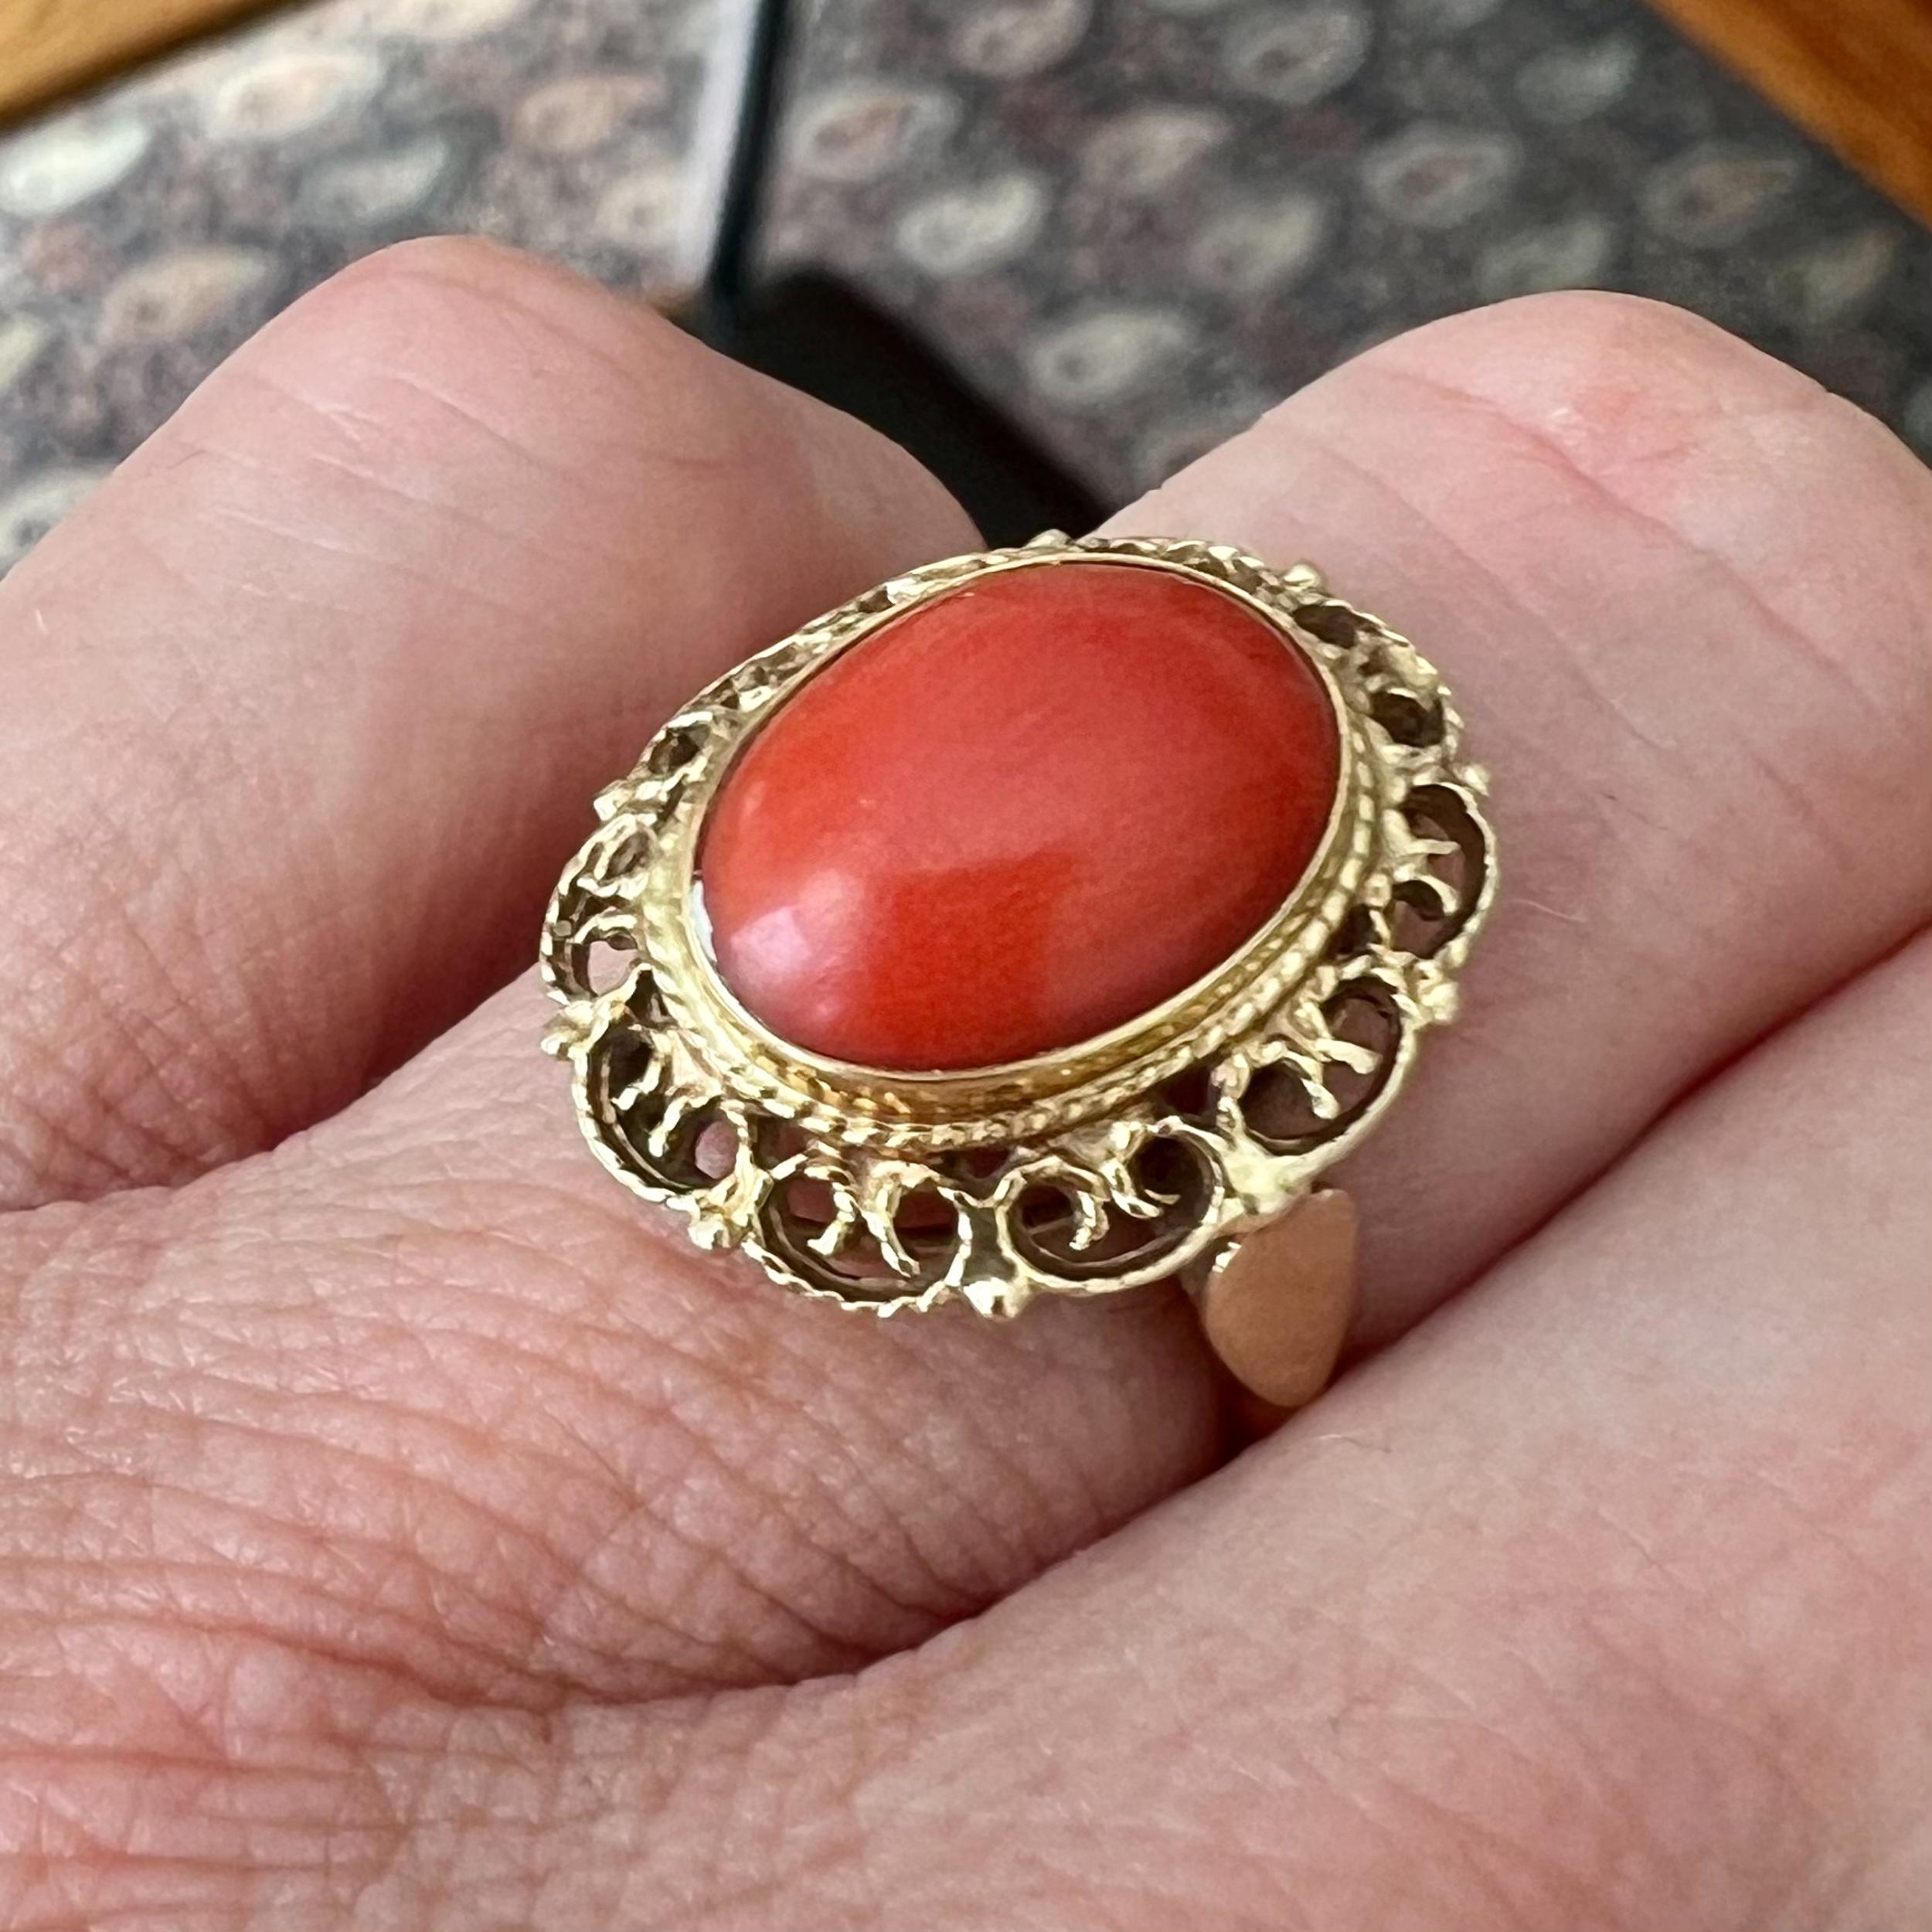 A vintage 14 karat yellow gold natural coral ring. The oval-shaped frame of the ring is beautiful and has a detailed openwork filigree design. The stone is bezel set in a 14 karat gold frame, lovely detailed with a rope motif around the rim of the